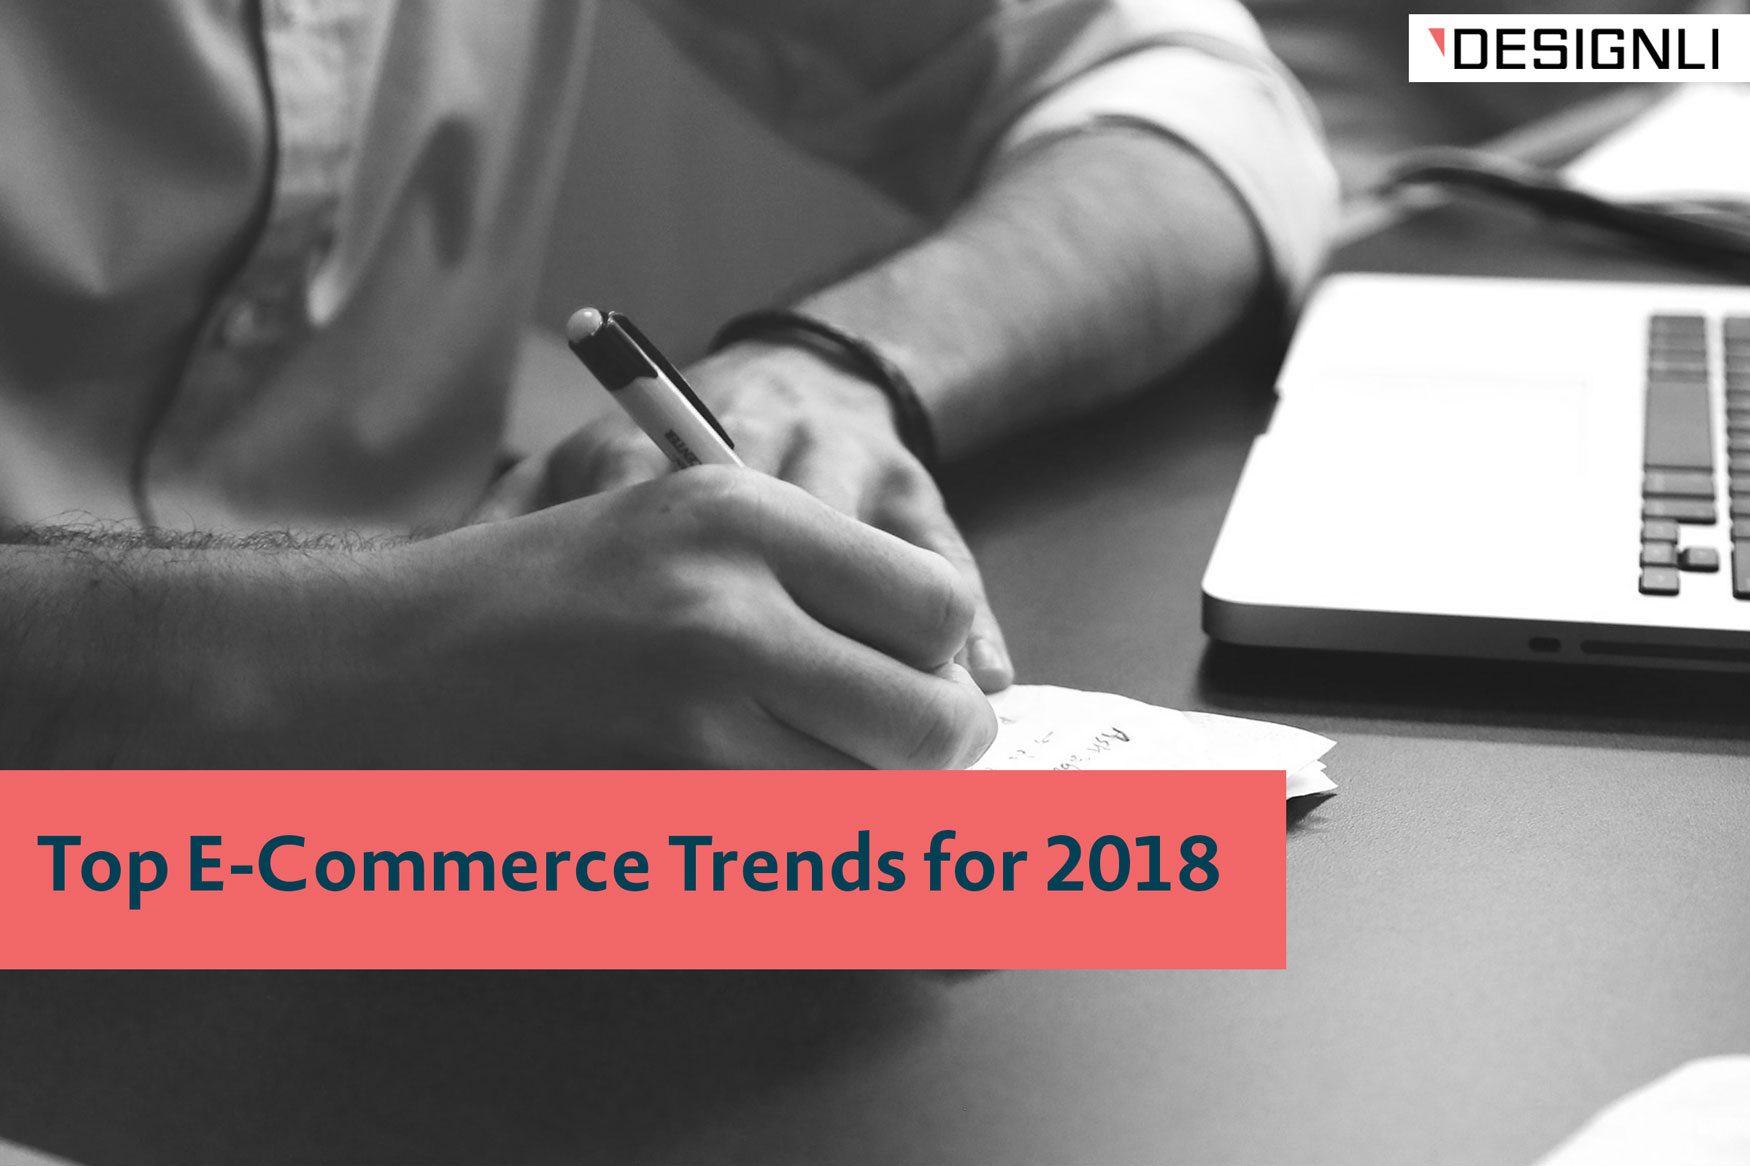 Top E-Commerce Trends for 2018